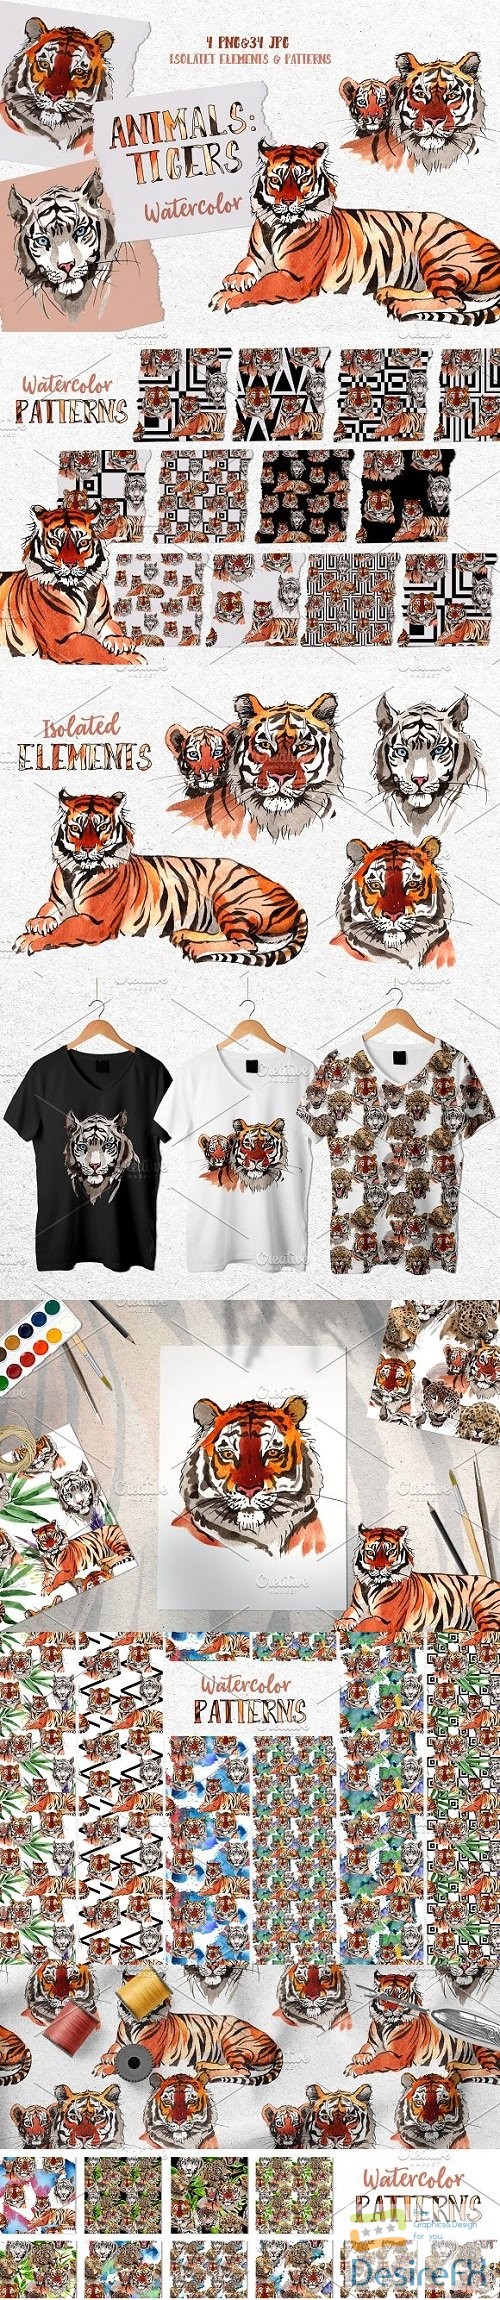 Animals: Tigers Watercolor png - 3502650